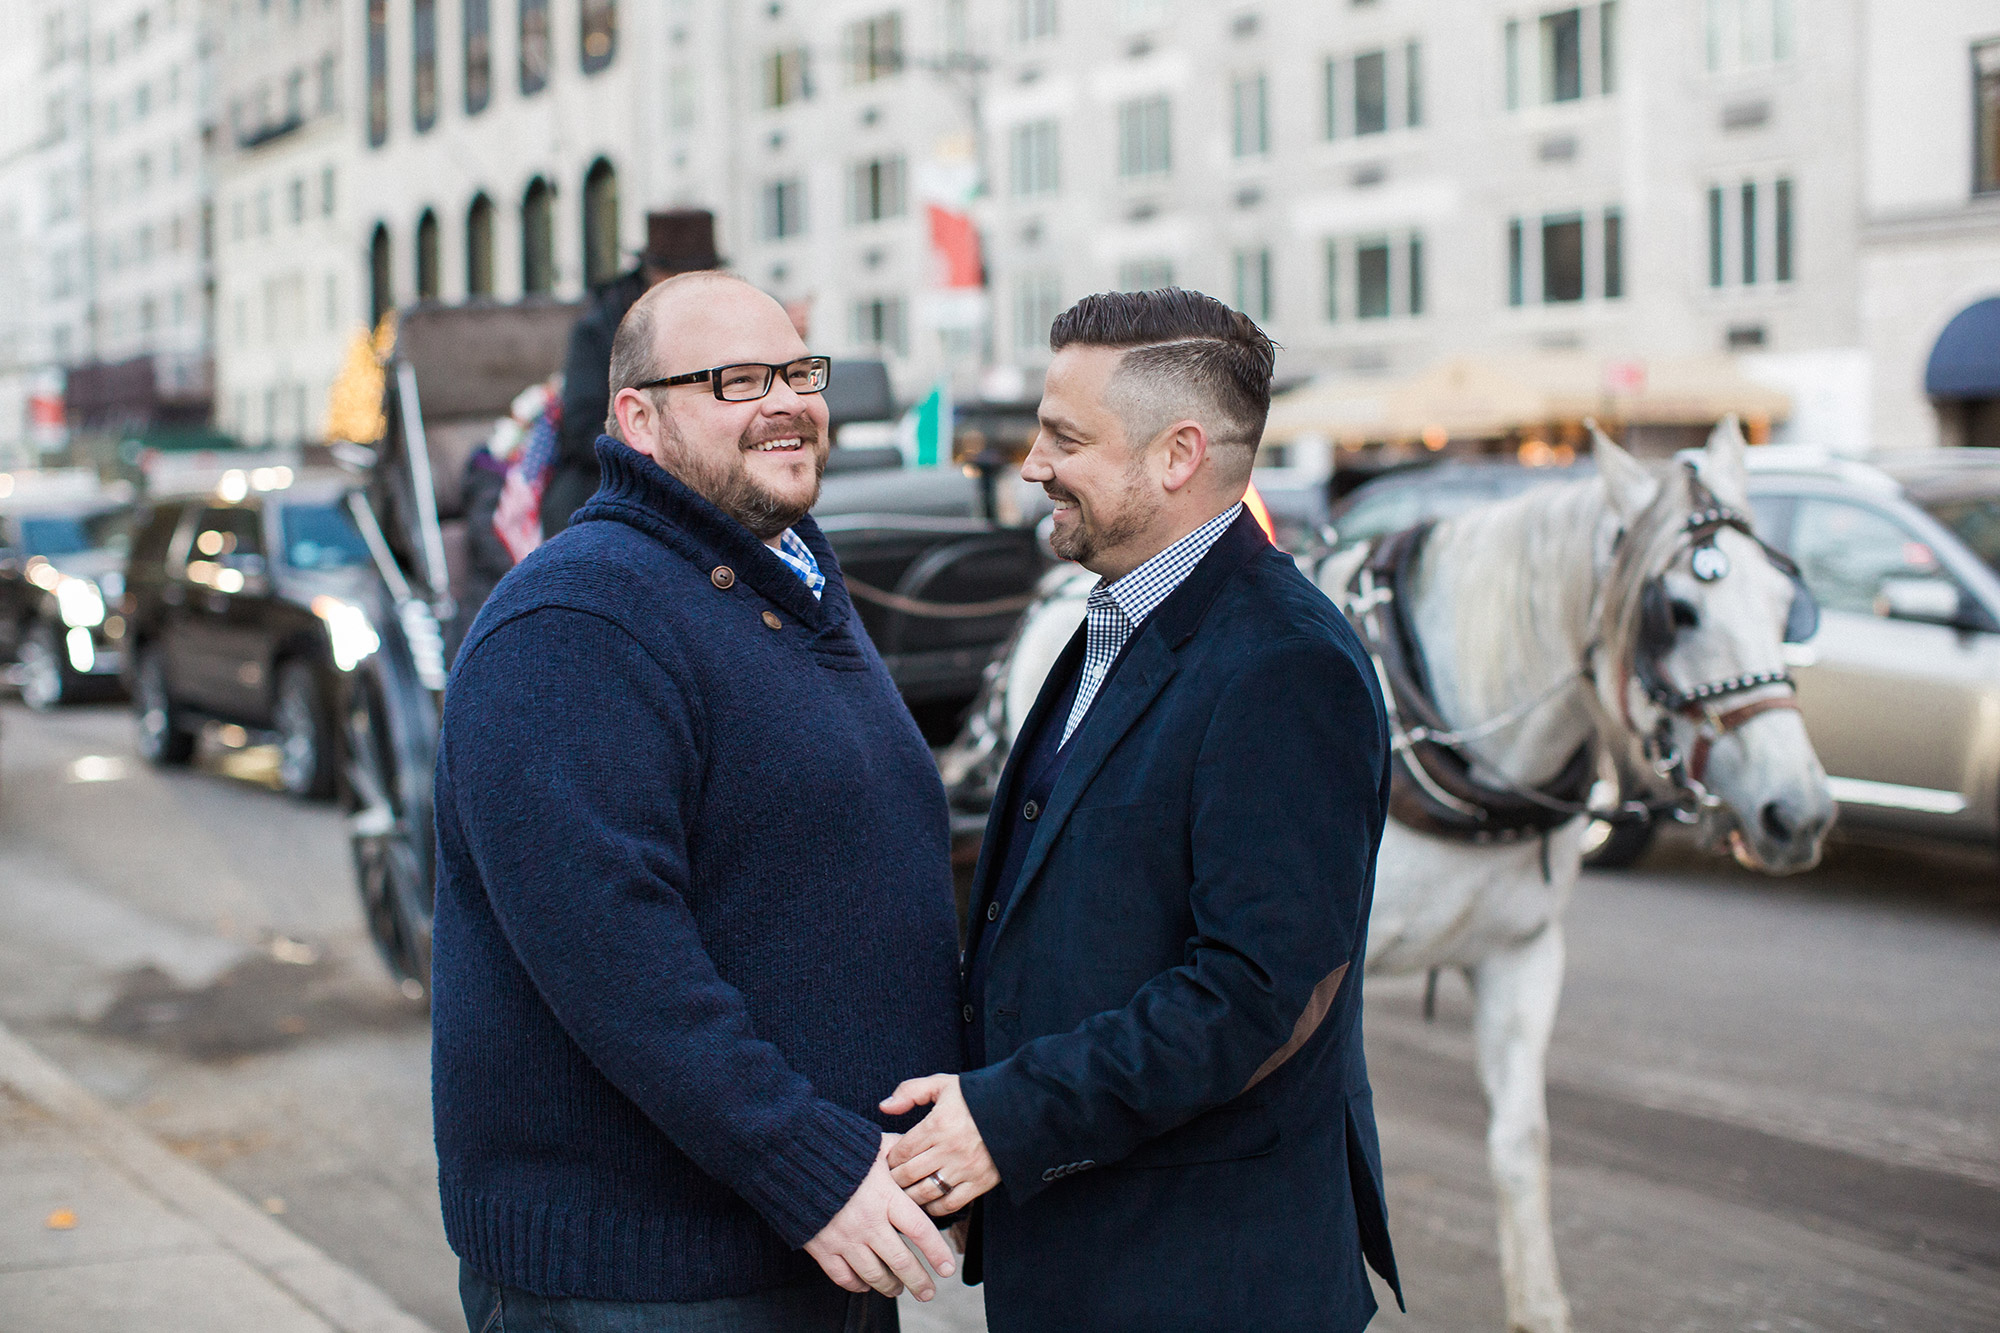 Same sex elopement in Central Park. Photos by Kelly Kollar Photography.